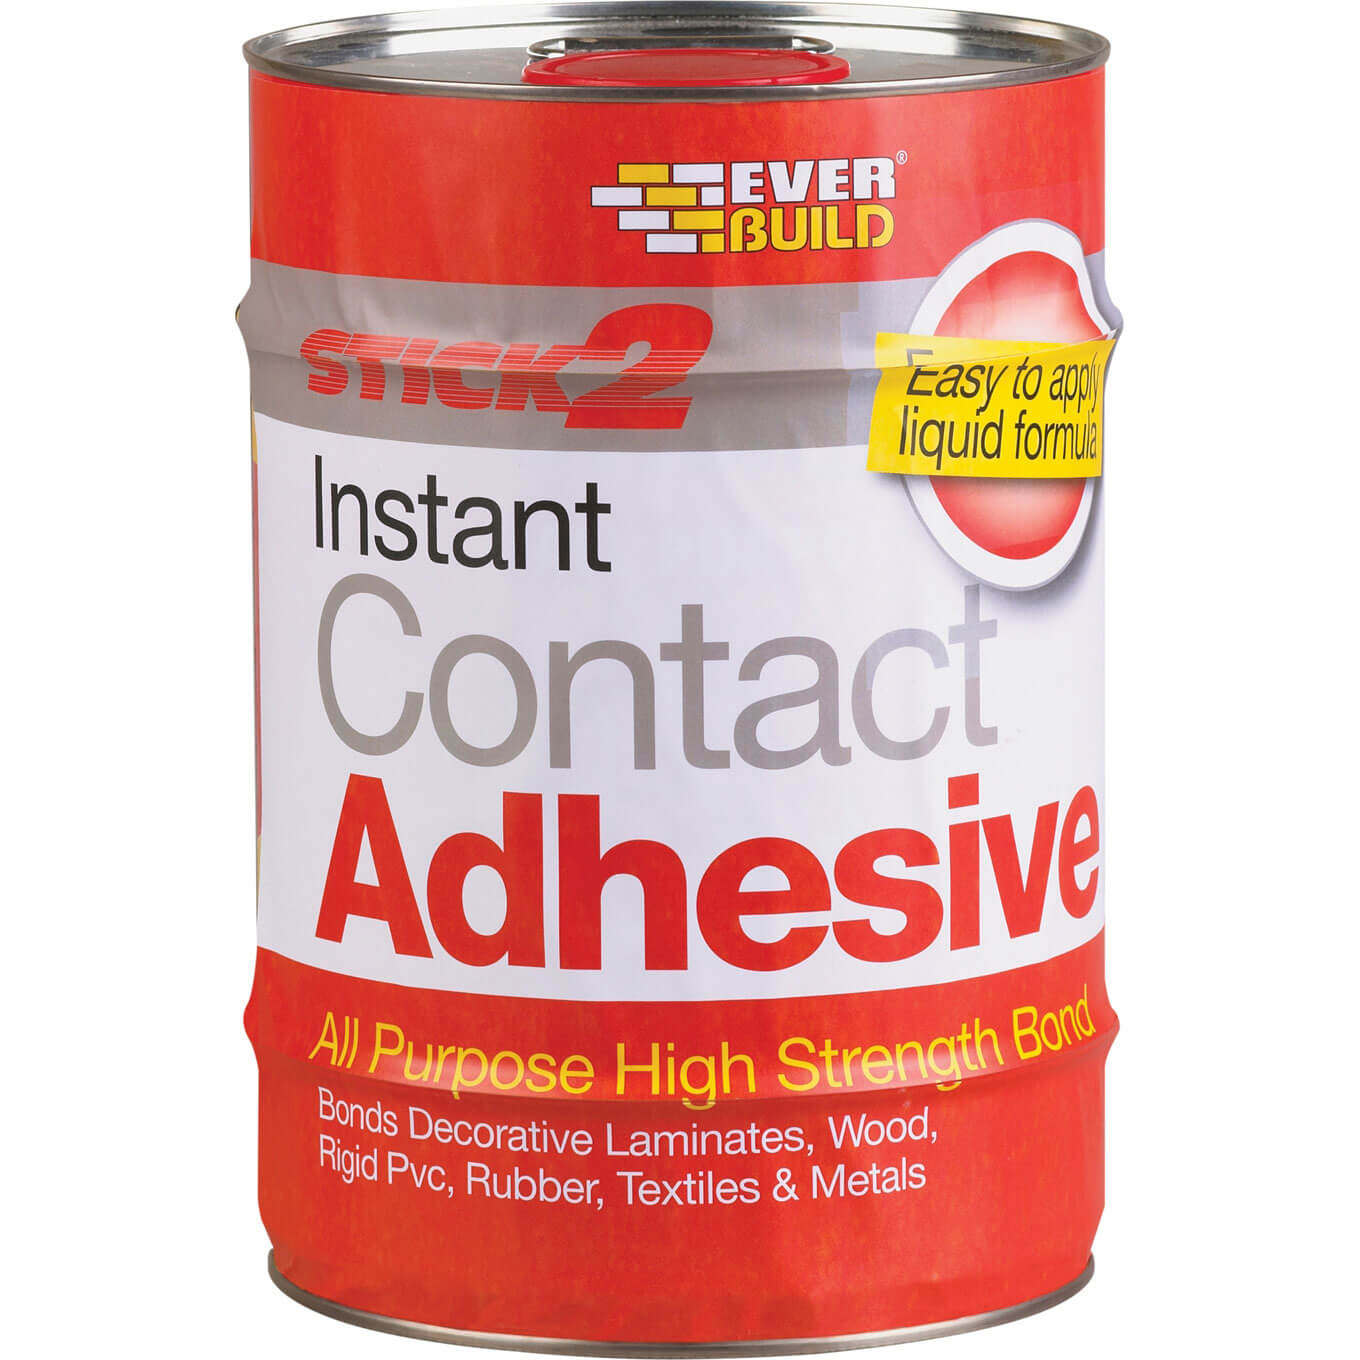 Image of Everbuild Stick 2 All Purpose Contact Adhesive 5l